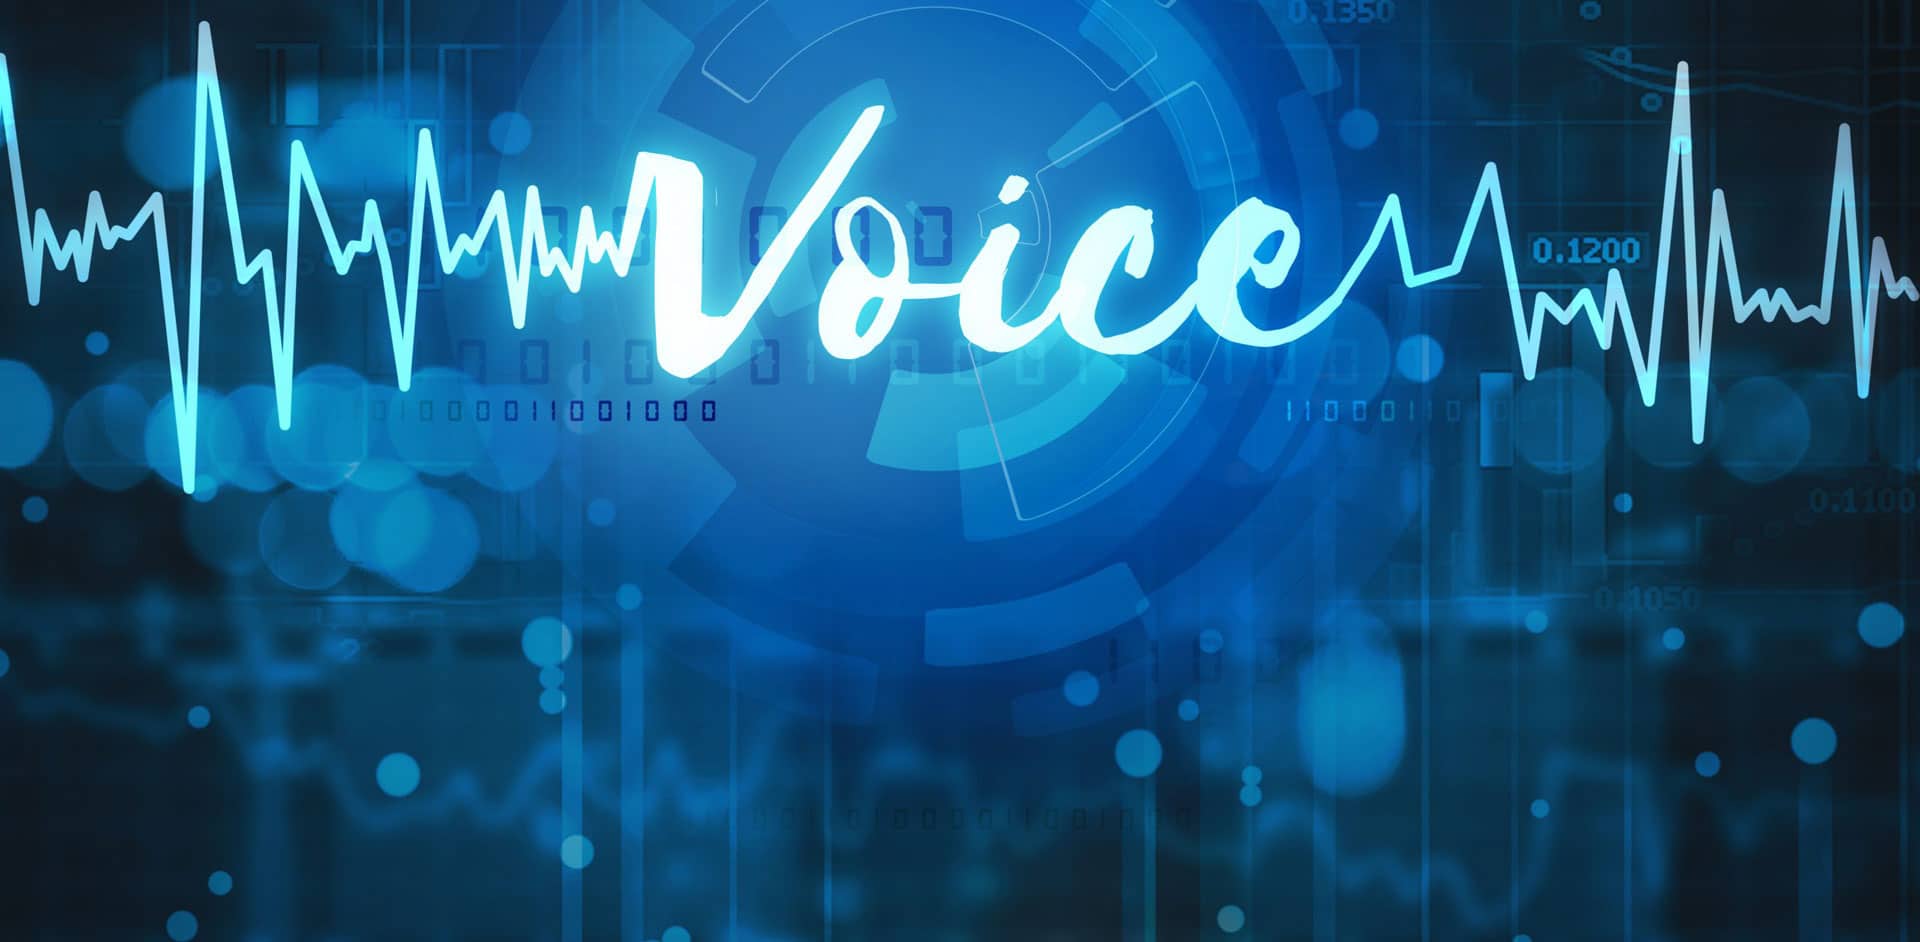 Voice heartbeat line in front of blue background with digital numbers.